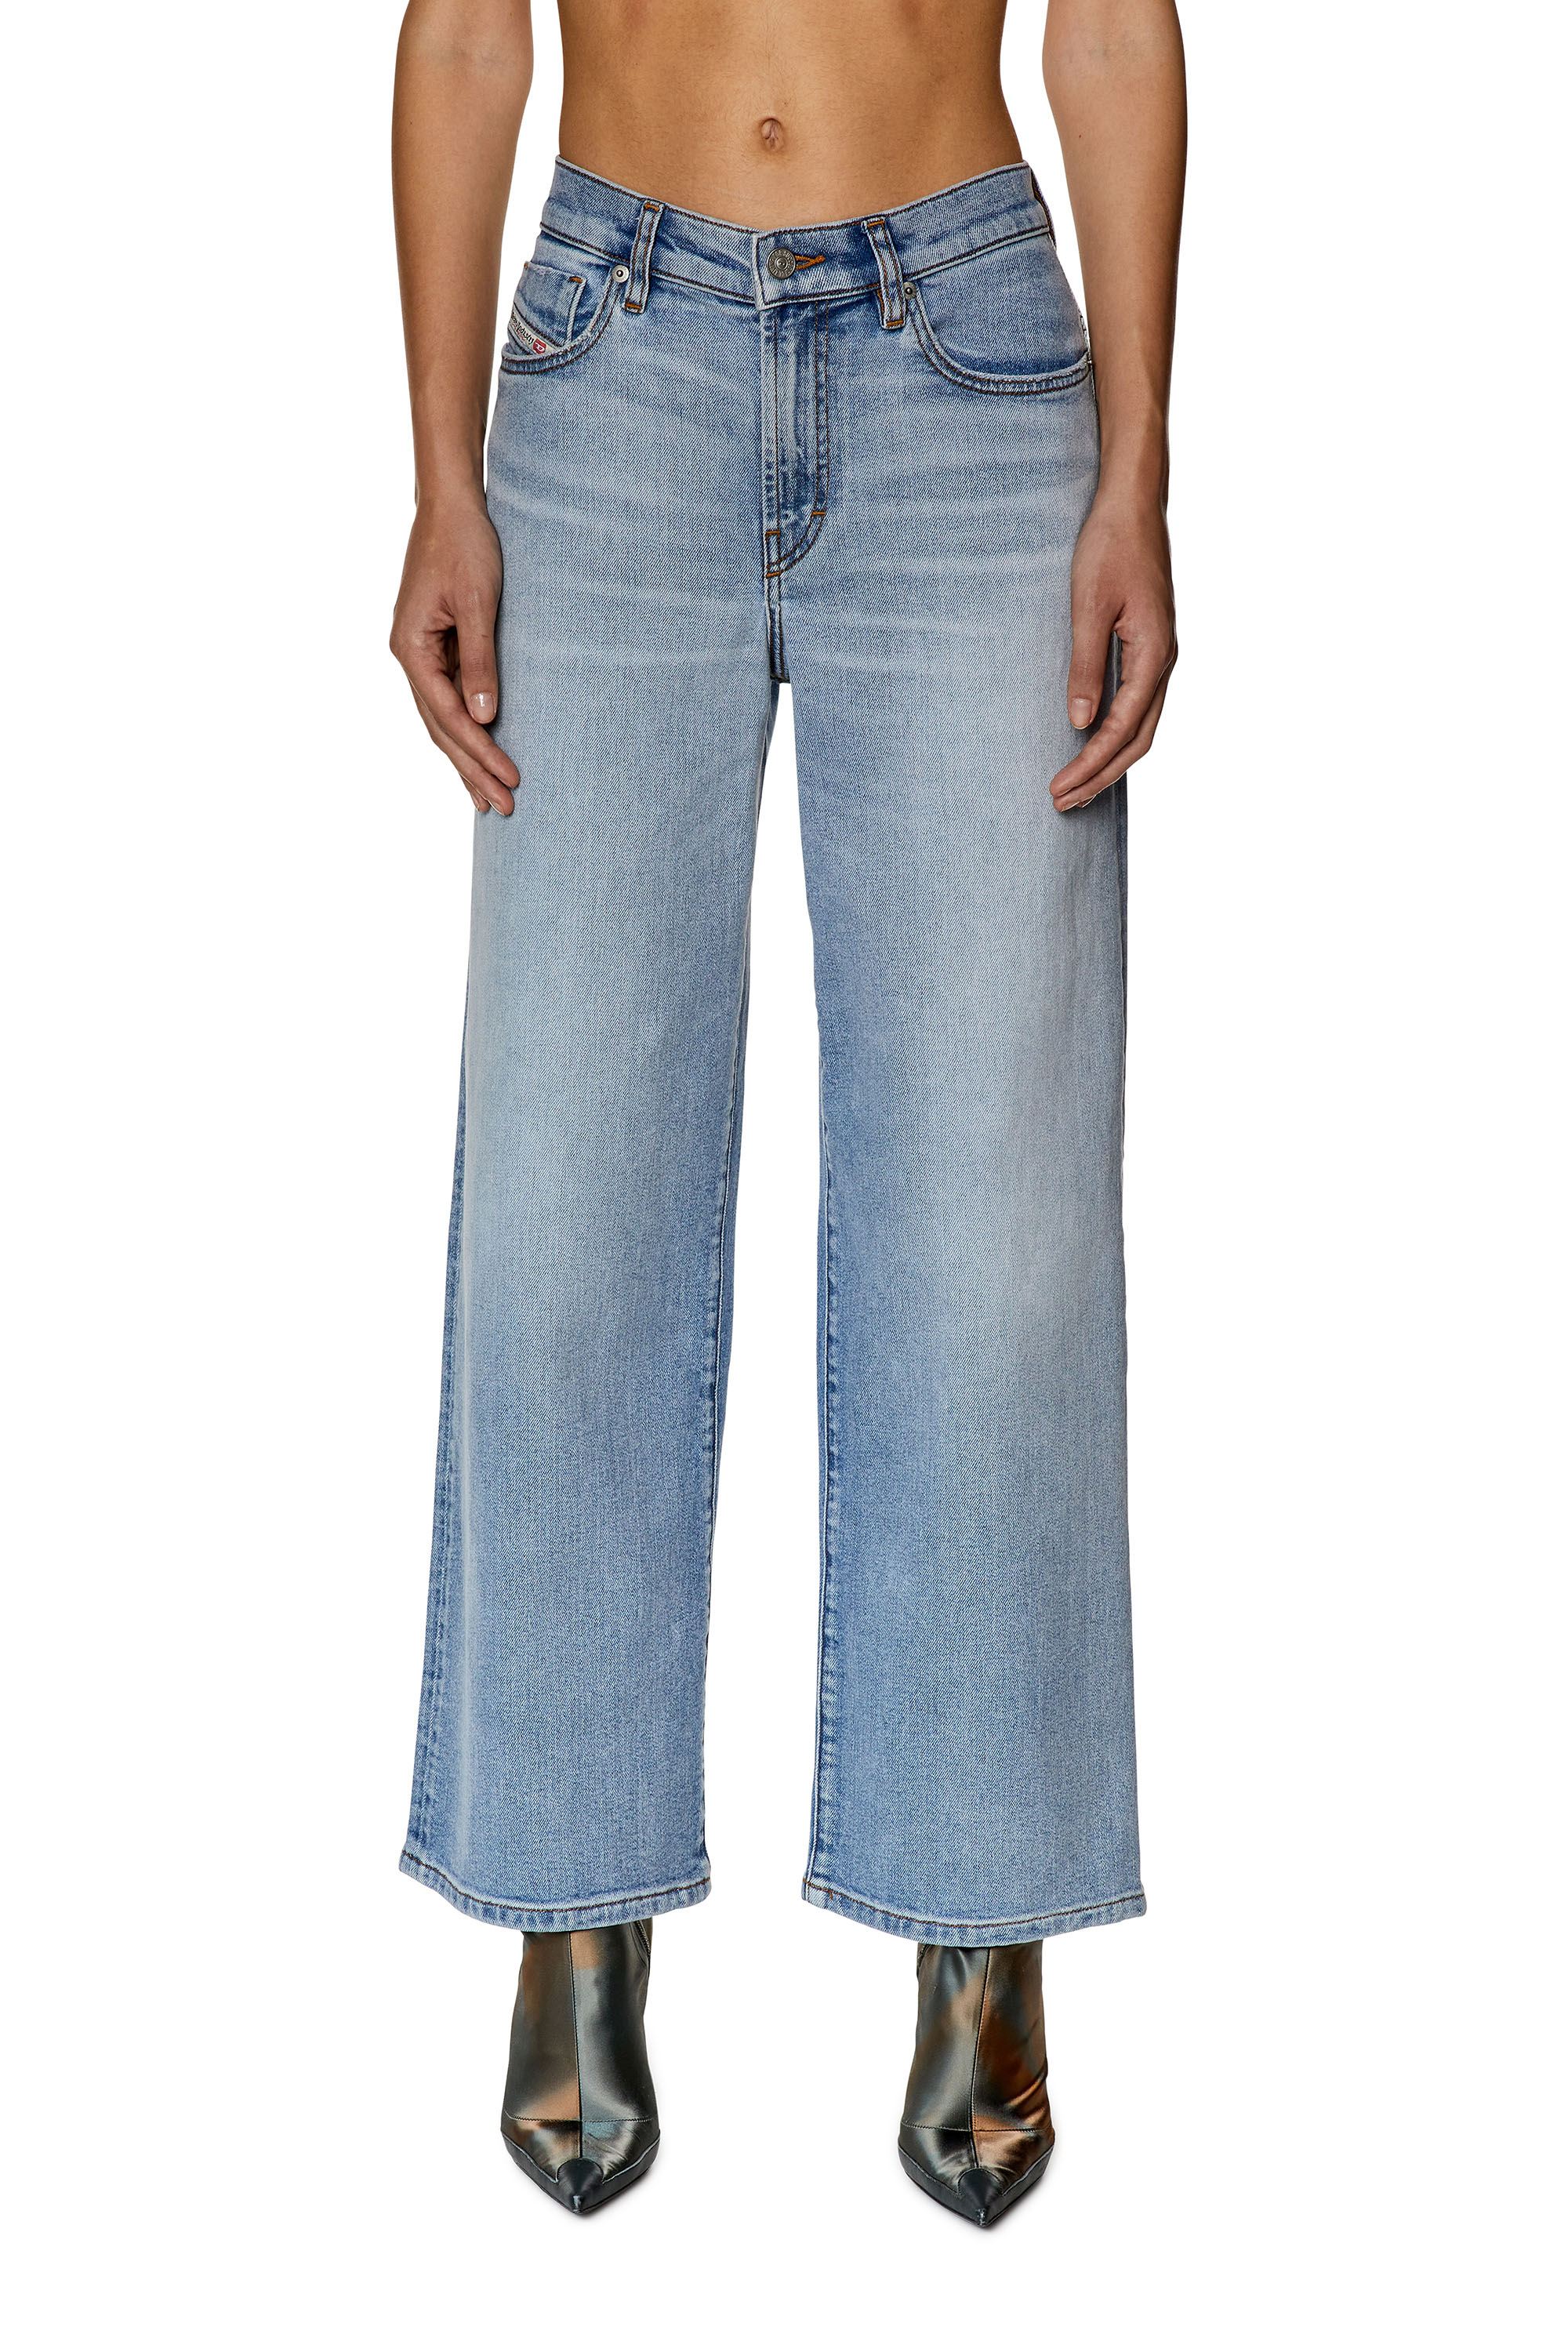 Women's Bootcut and Flare Jeans | Light blue | Diesel 2000 Widee